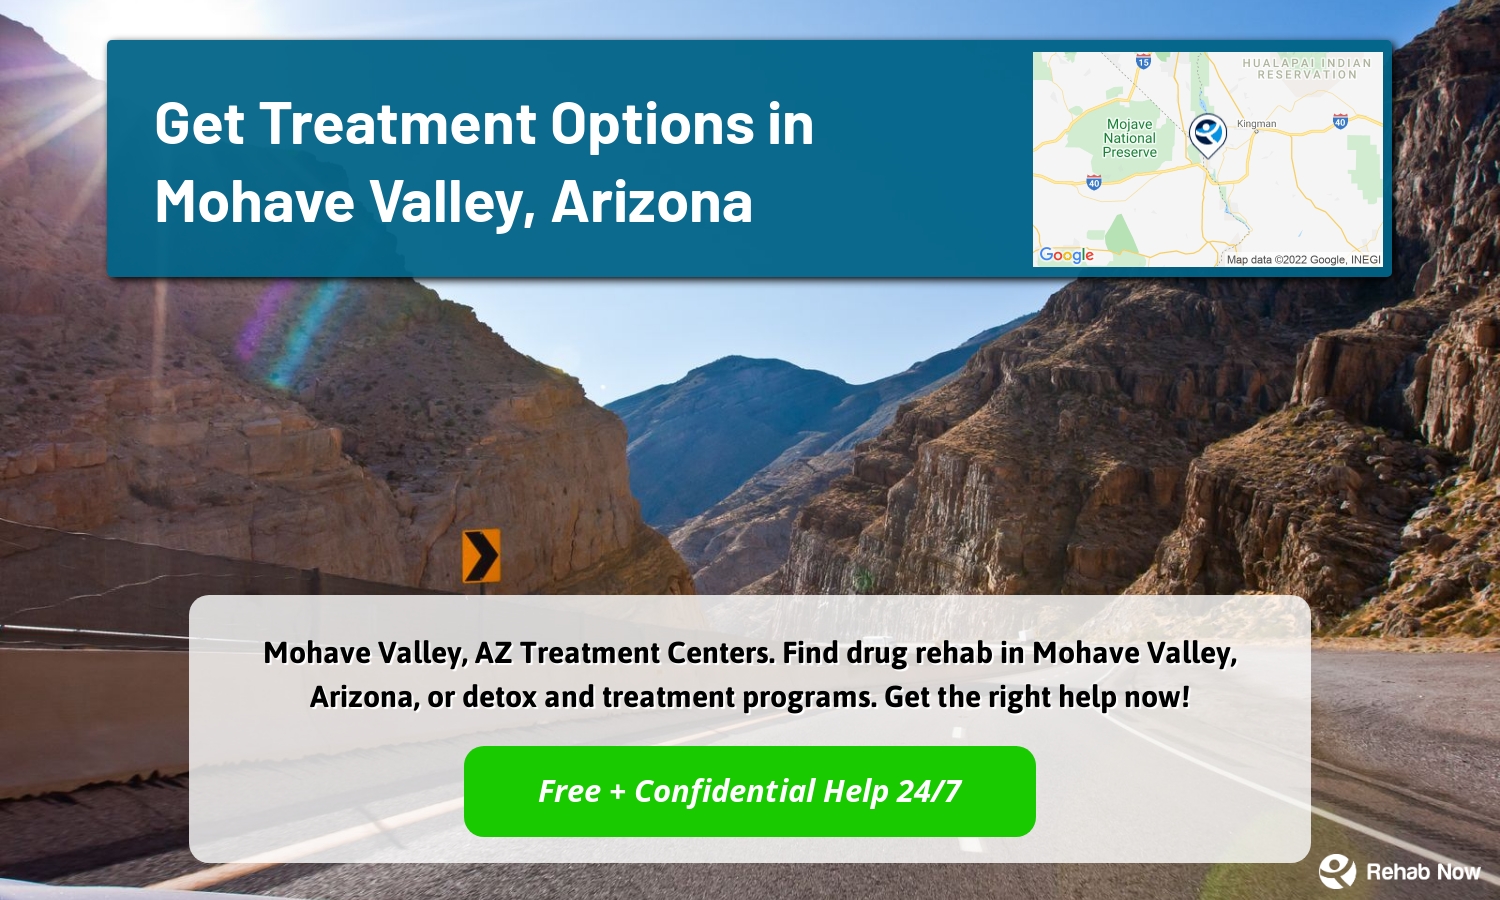 Mohave Valley, AZ Treatment Centers. Find drug rehab in Mohave Valley, Arizona, or detox and treatment programs. Get the right help now!